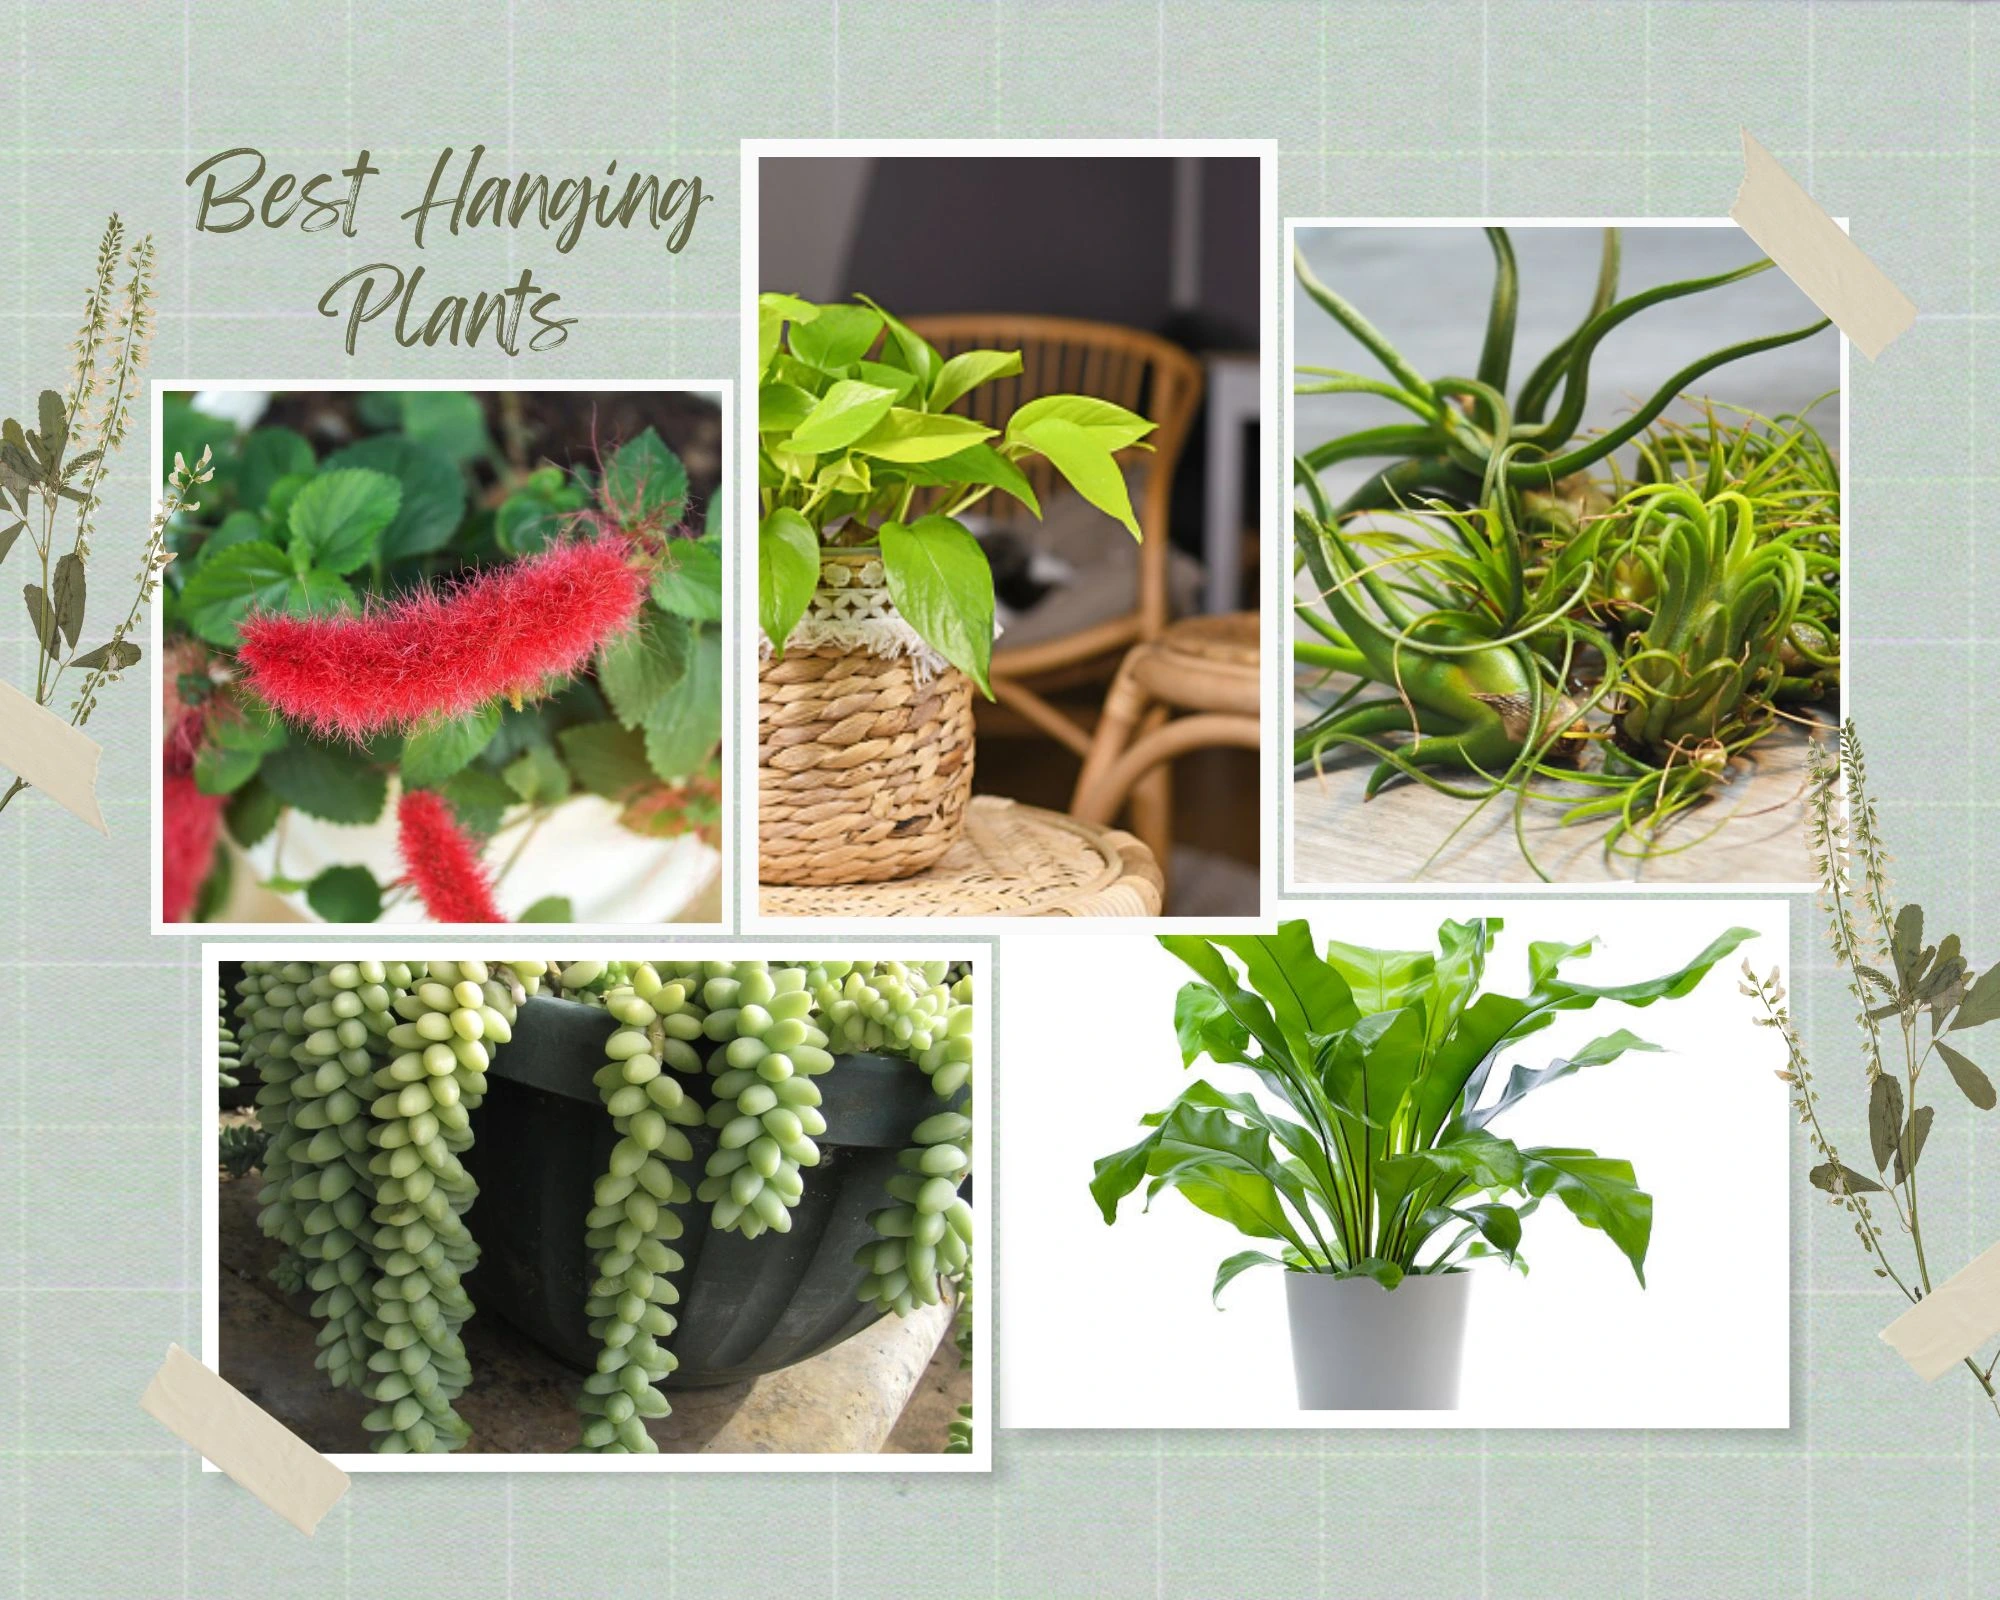 Top 10 Hanging Plants for Home